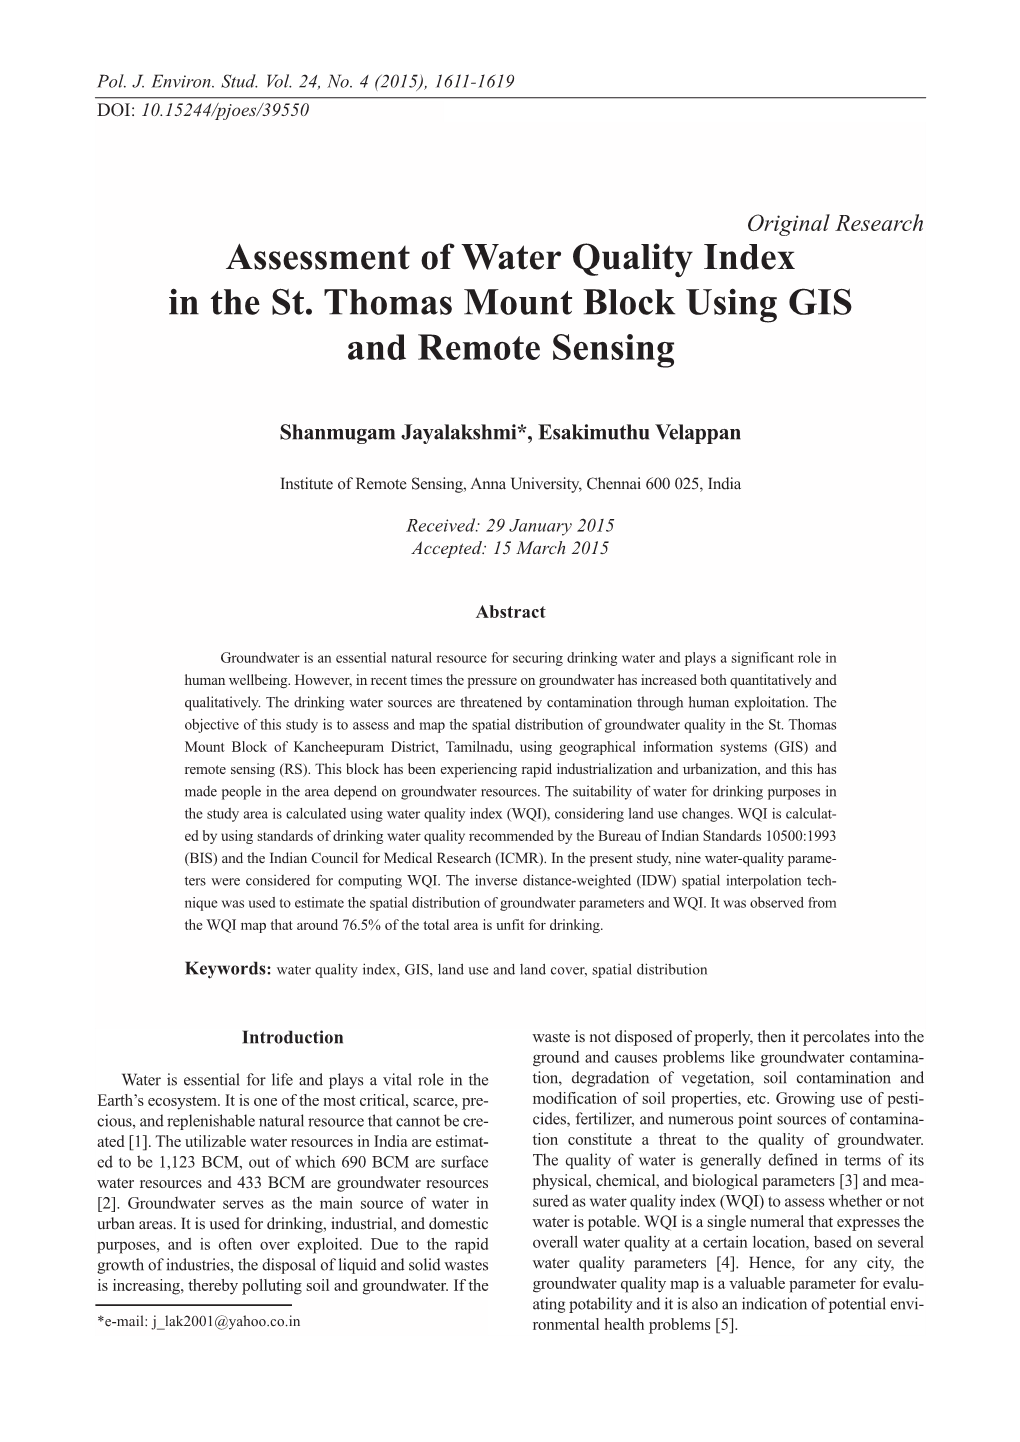 Assessment of Water Quality Index in the St. Thomas Mount Block Using GIS and Remote Sensing